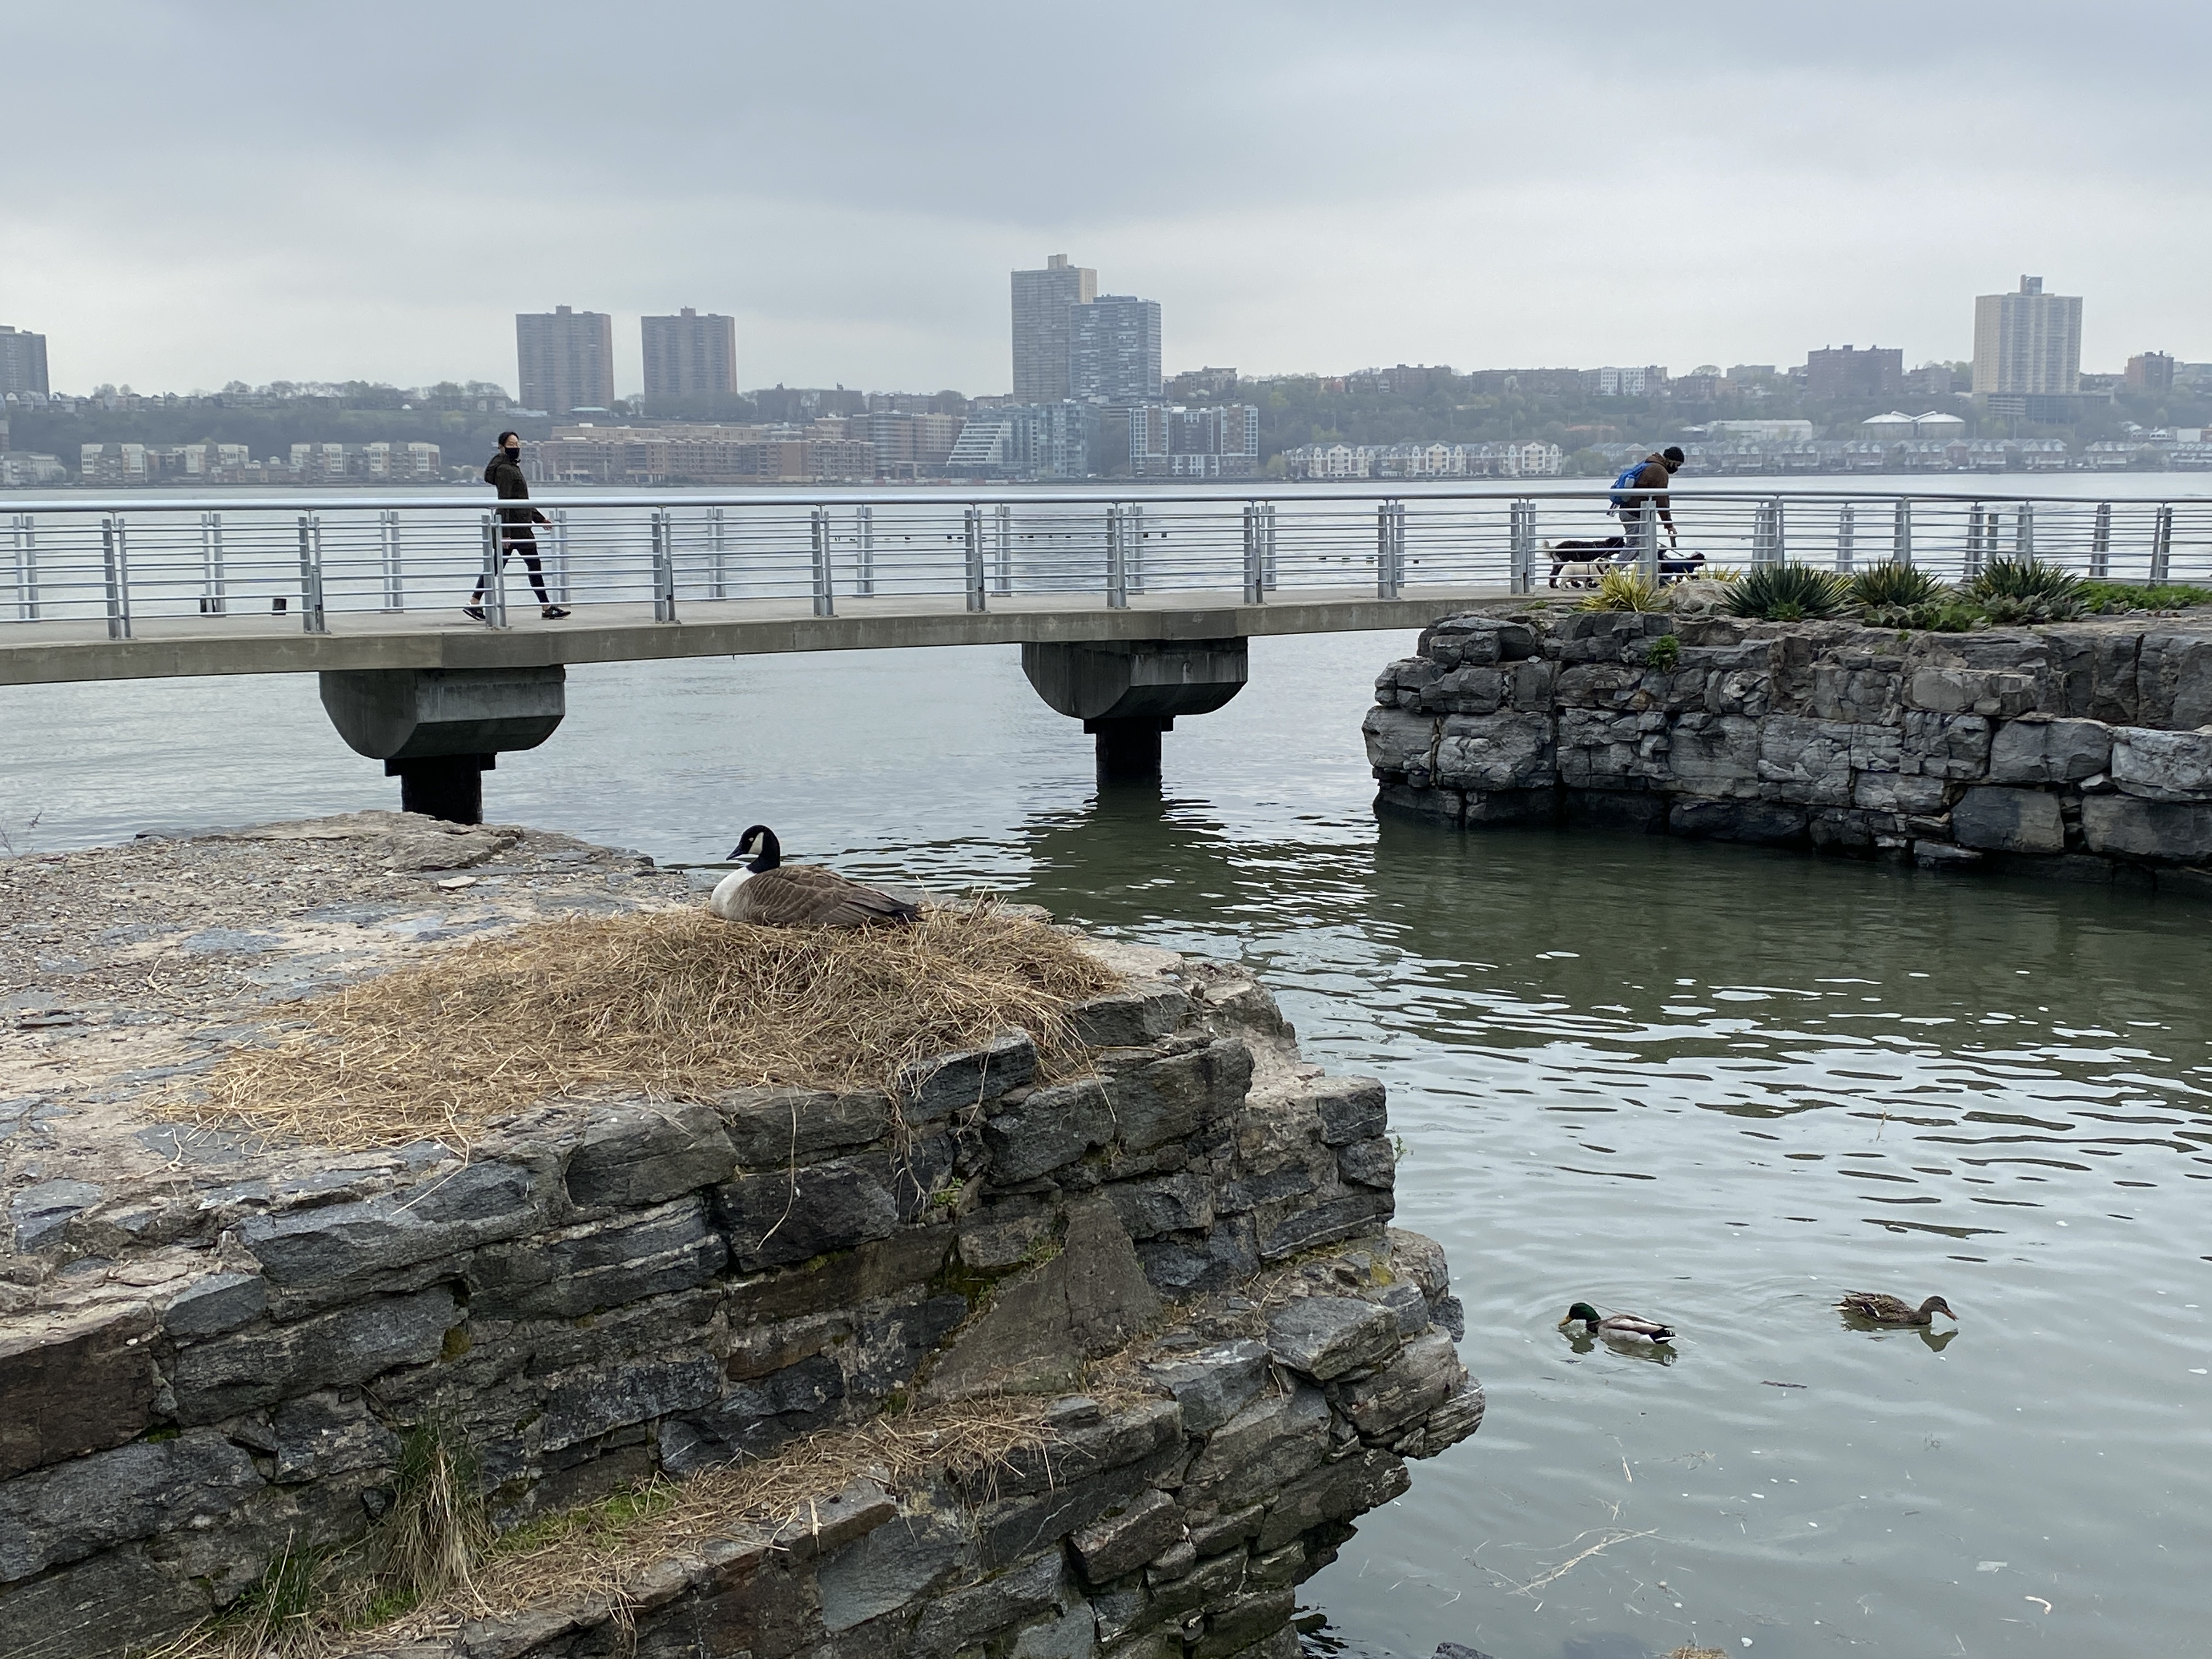 Runners on a path and a goose in a nest on an island in a cove off Riverside Park South